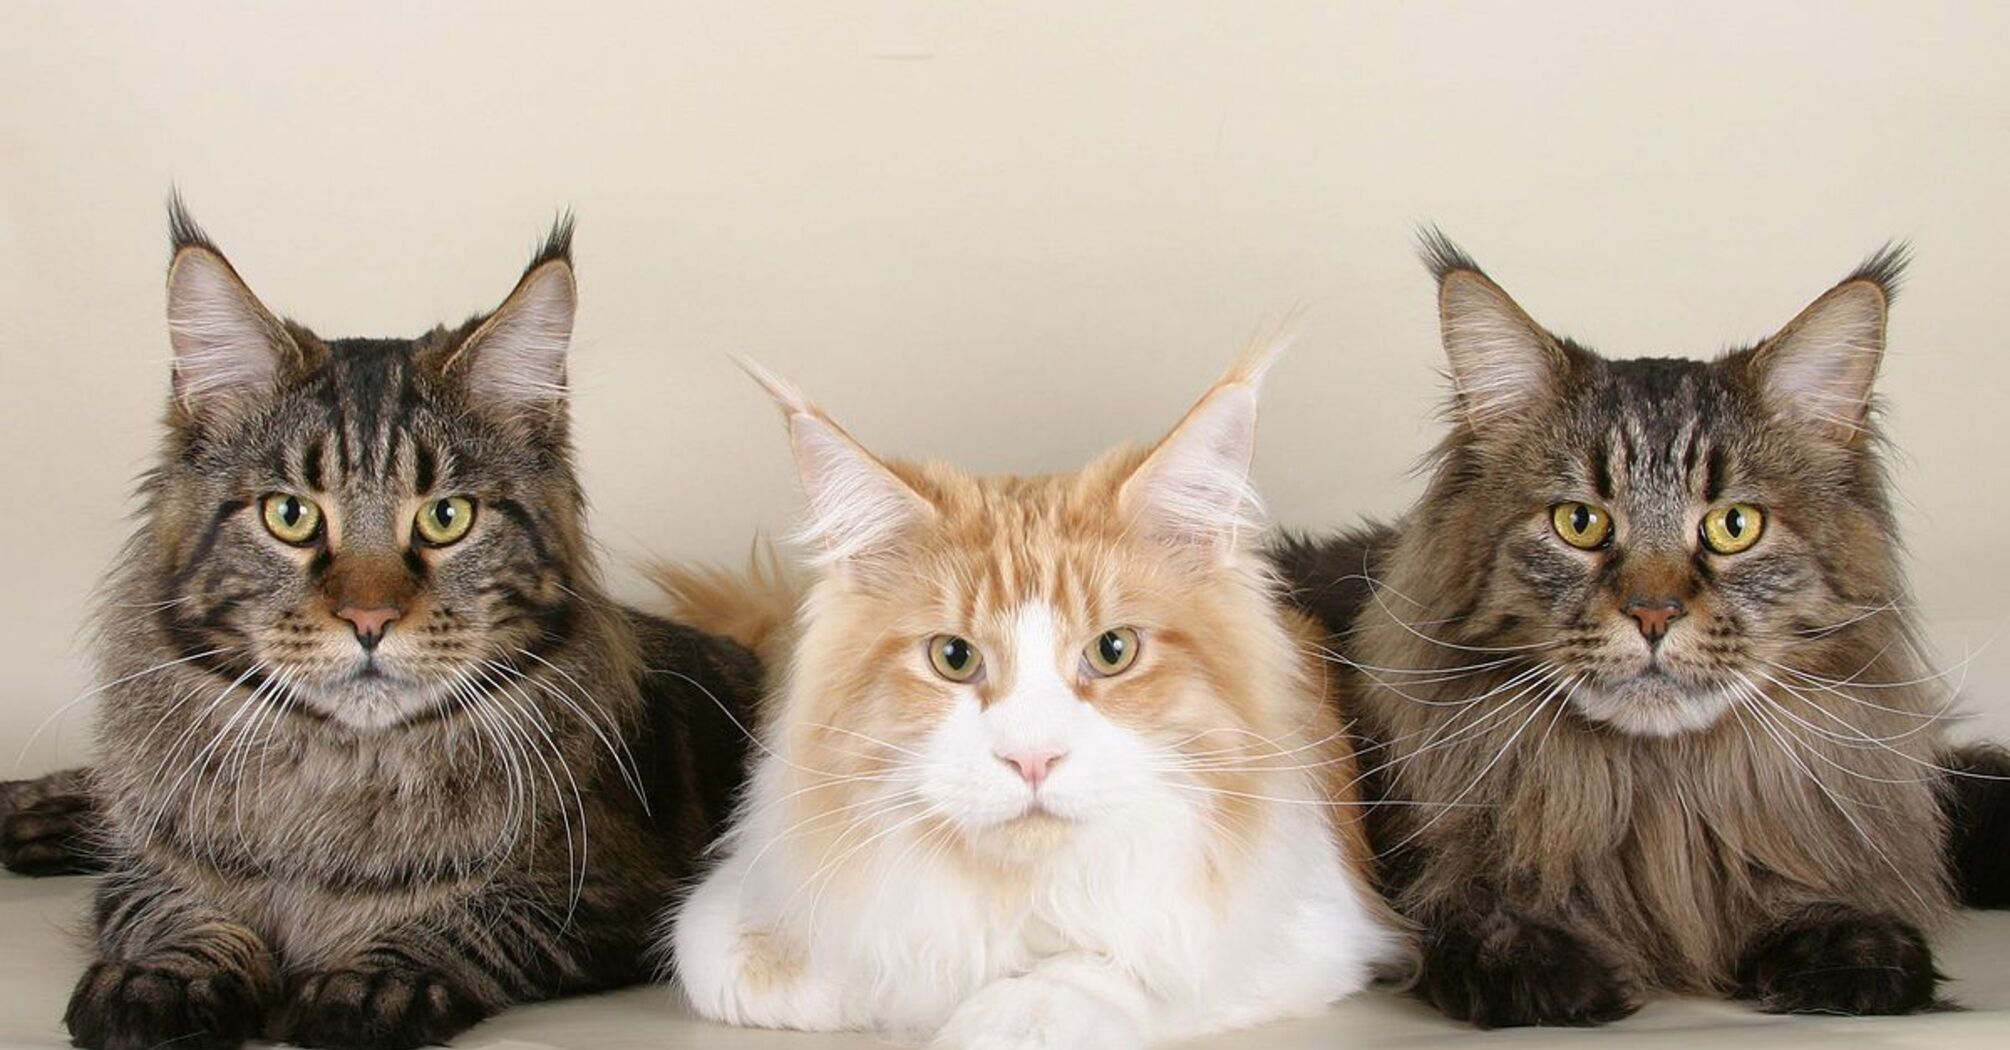 Features of the Maine Coon cat breed